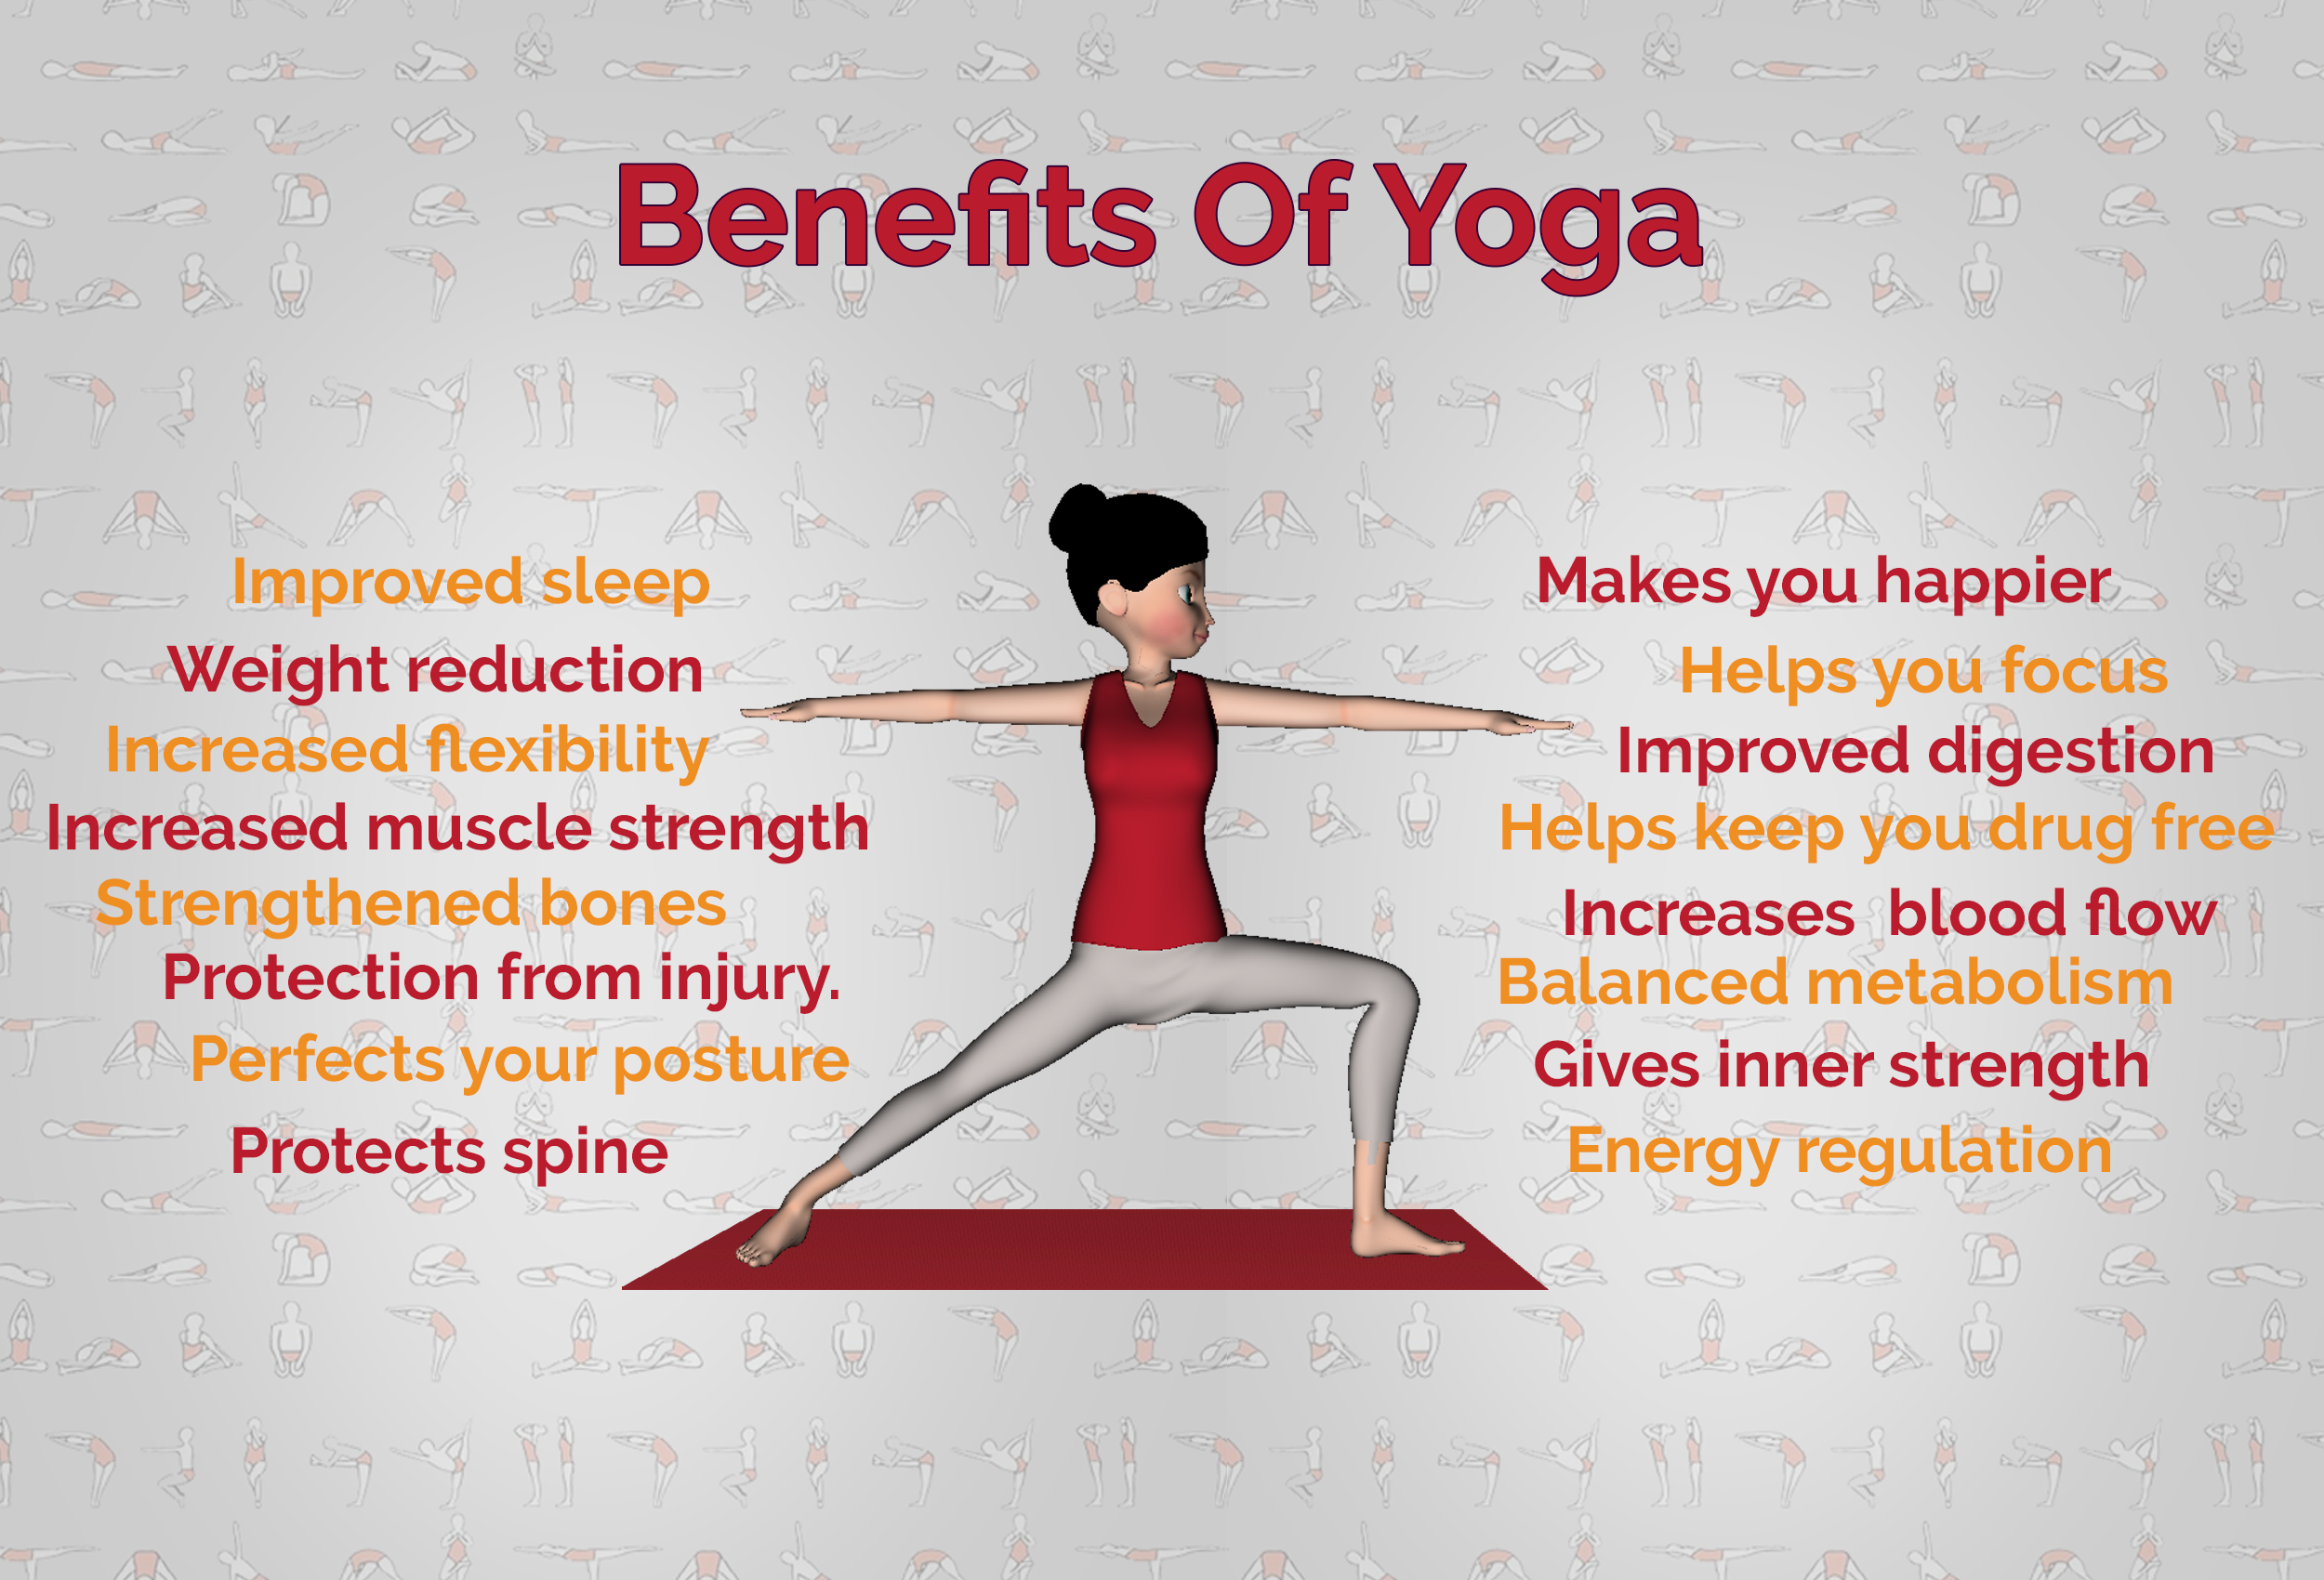 Health Benefits of Yoga: Why Is It Good for Your Body? - Yoga by